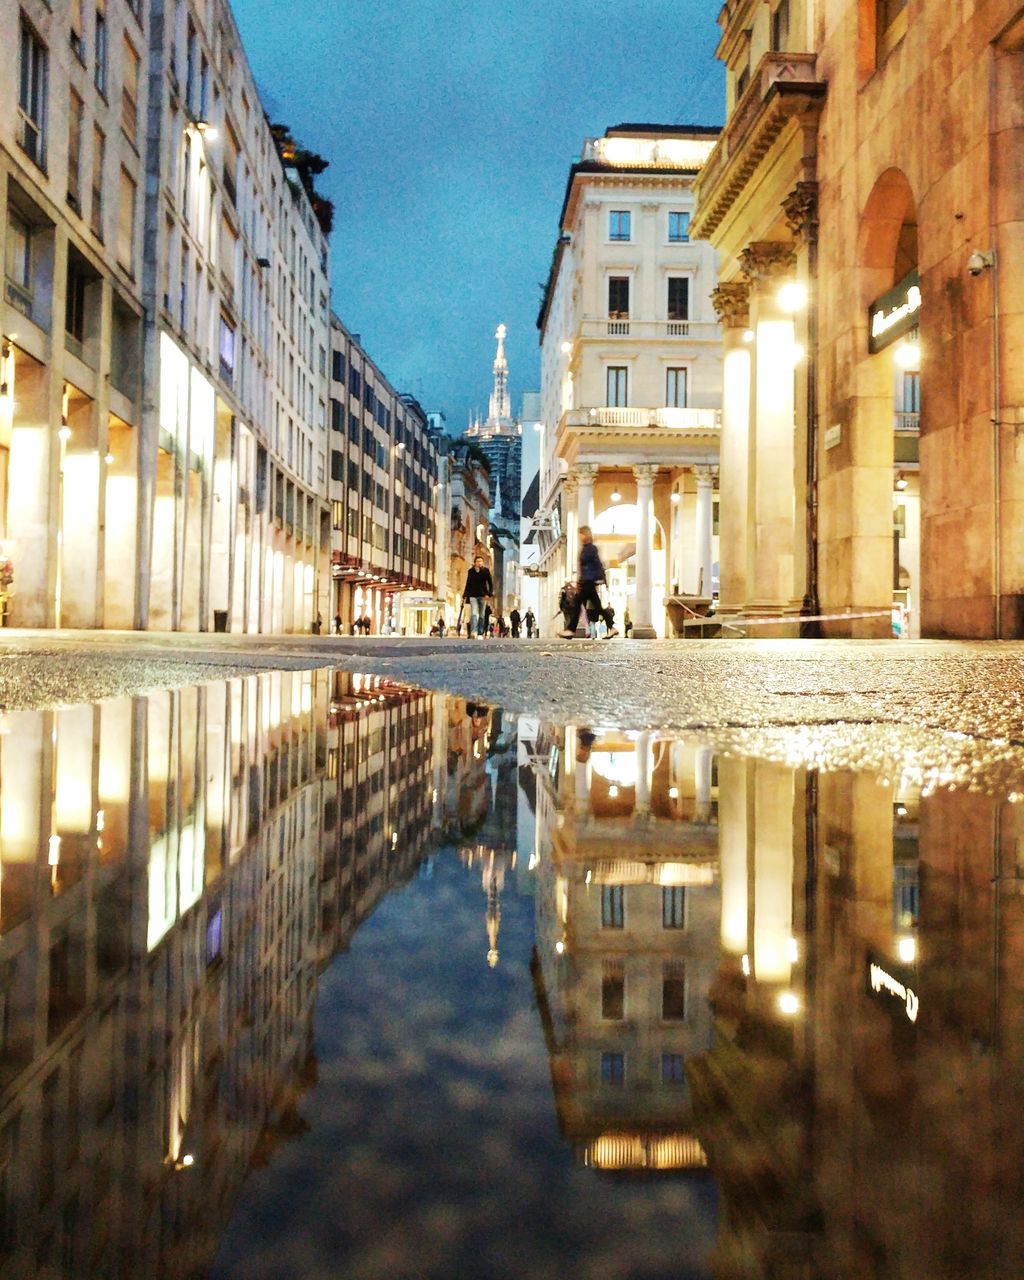 REFLECTION OF ILLUMINATED BUILDINGS IN PUDDLE